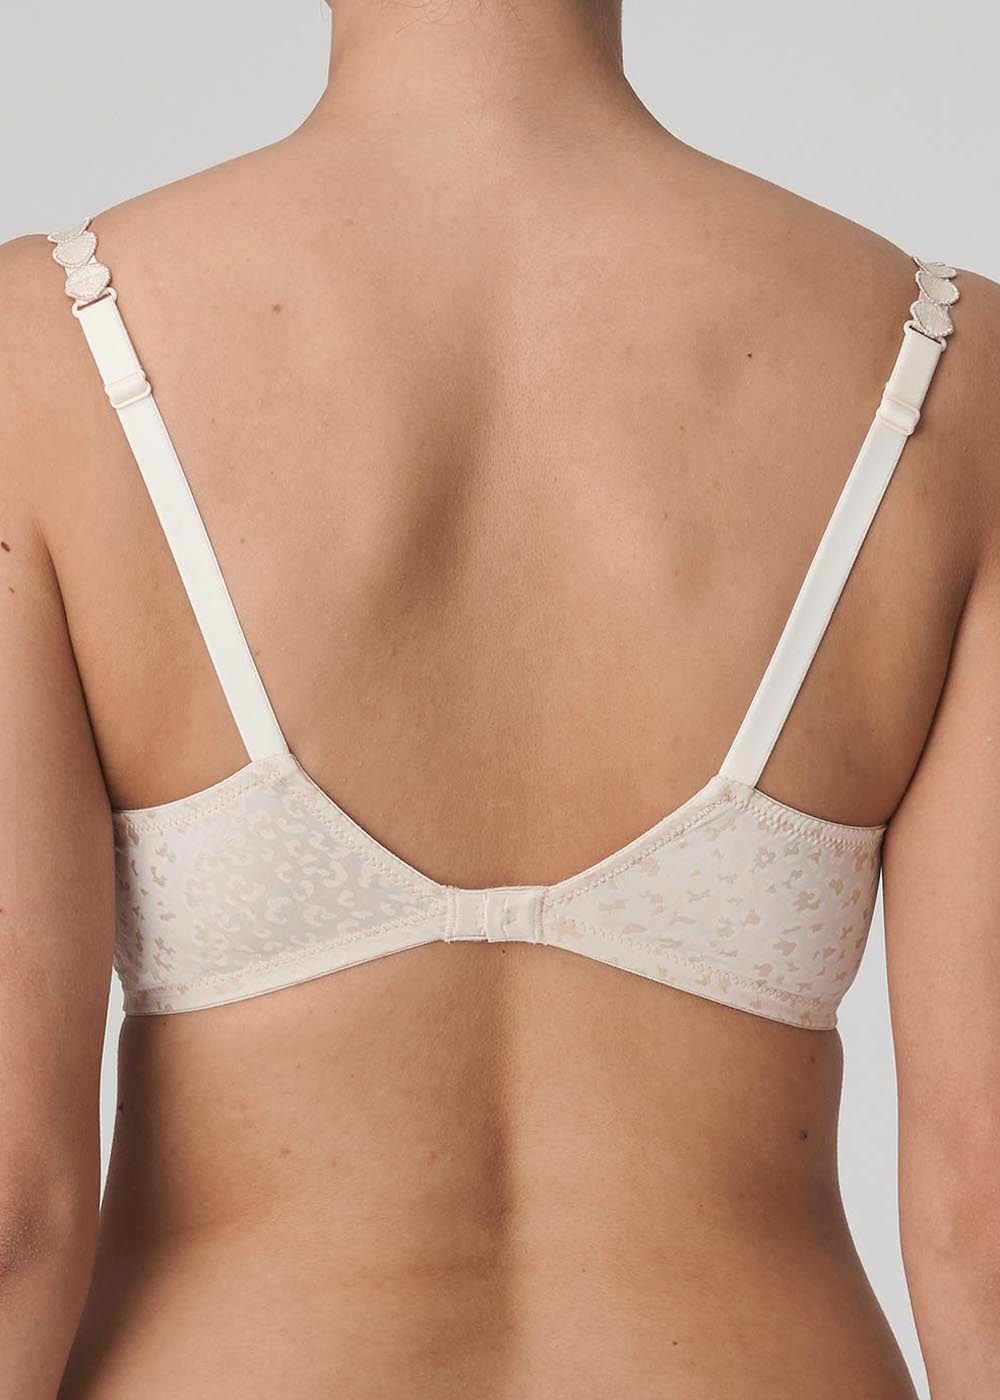 Soutien-gorge Emboitant Armatures Marie Jo l'Aventure Pearled Ivory